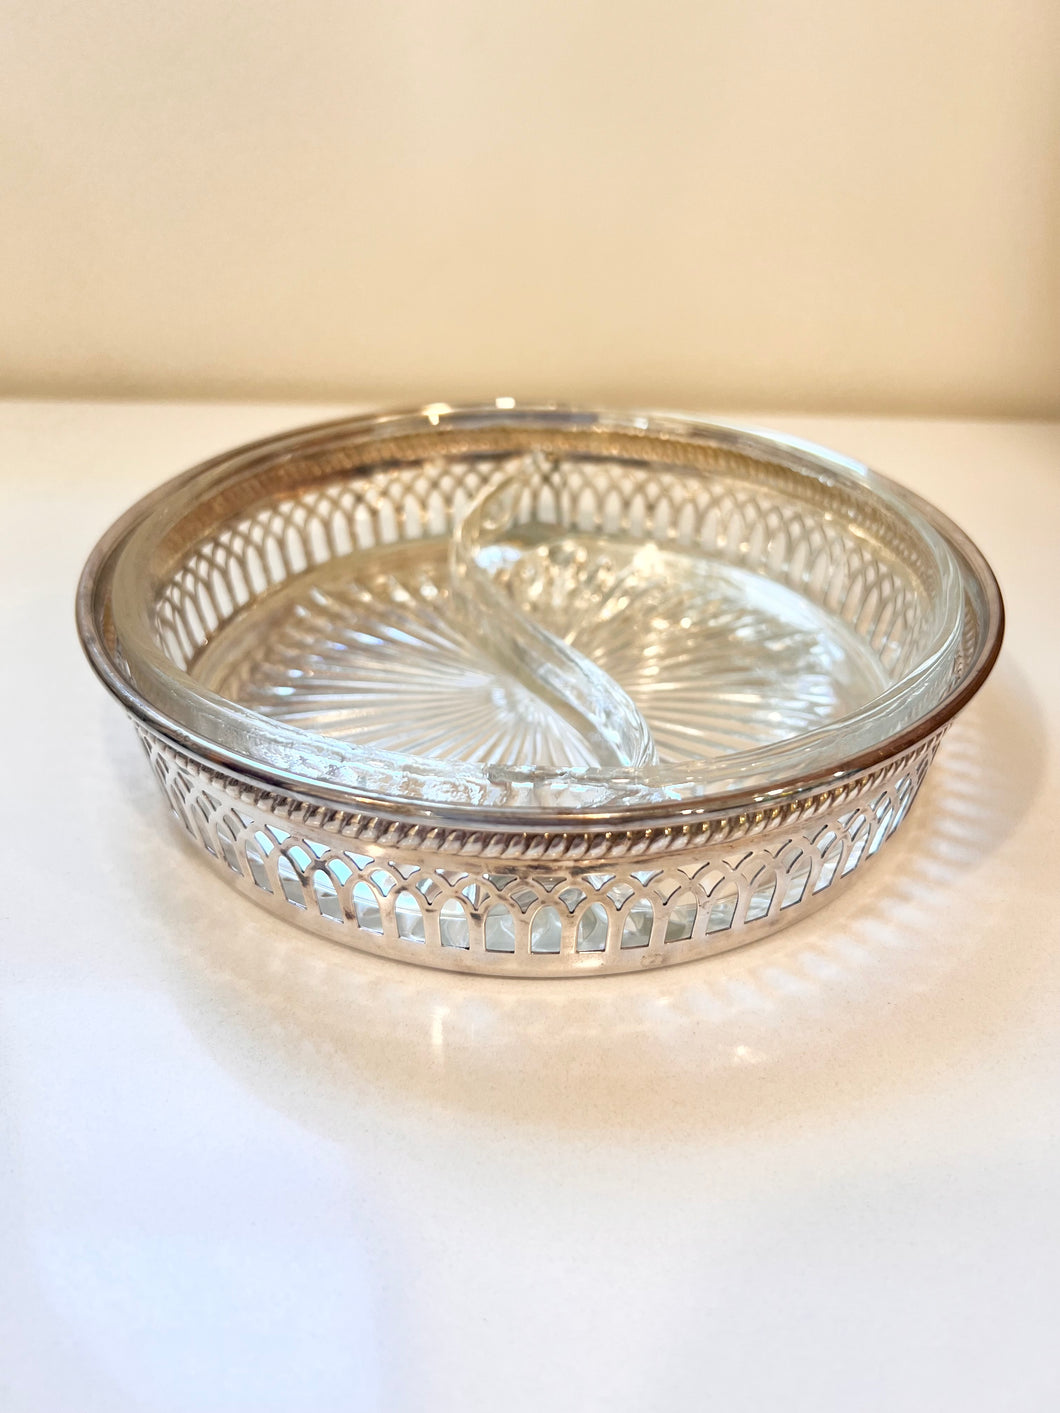 Small Vintage Silver-Plated Serving Tray with Glass Bowl